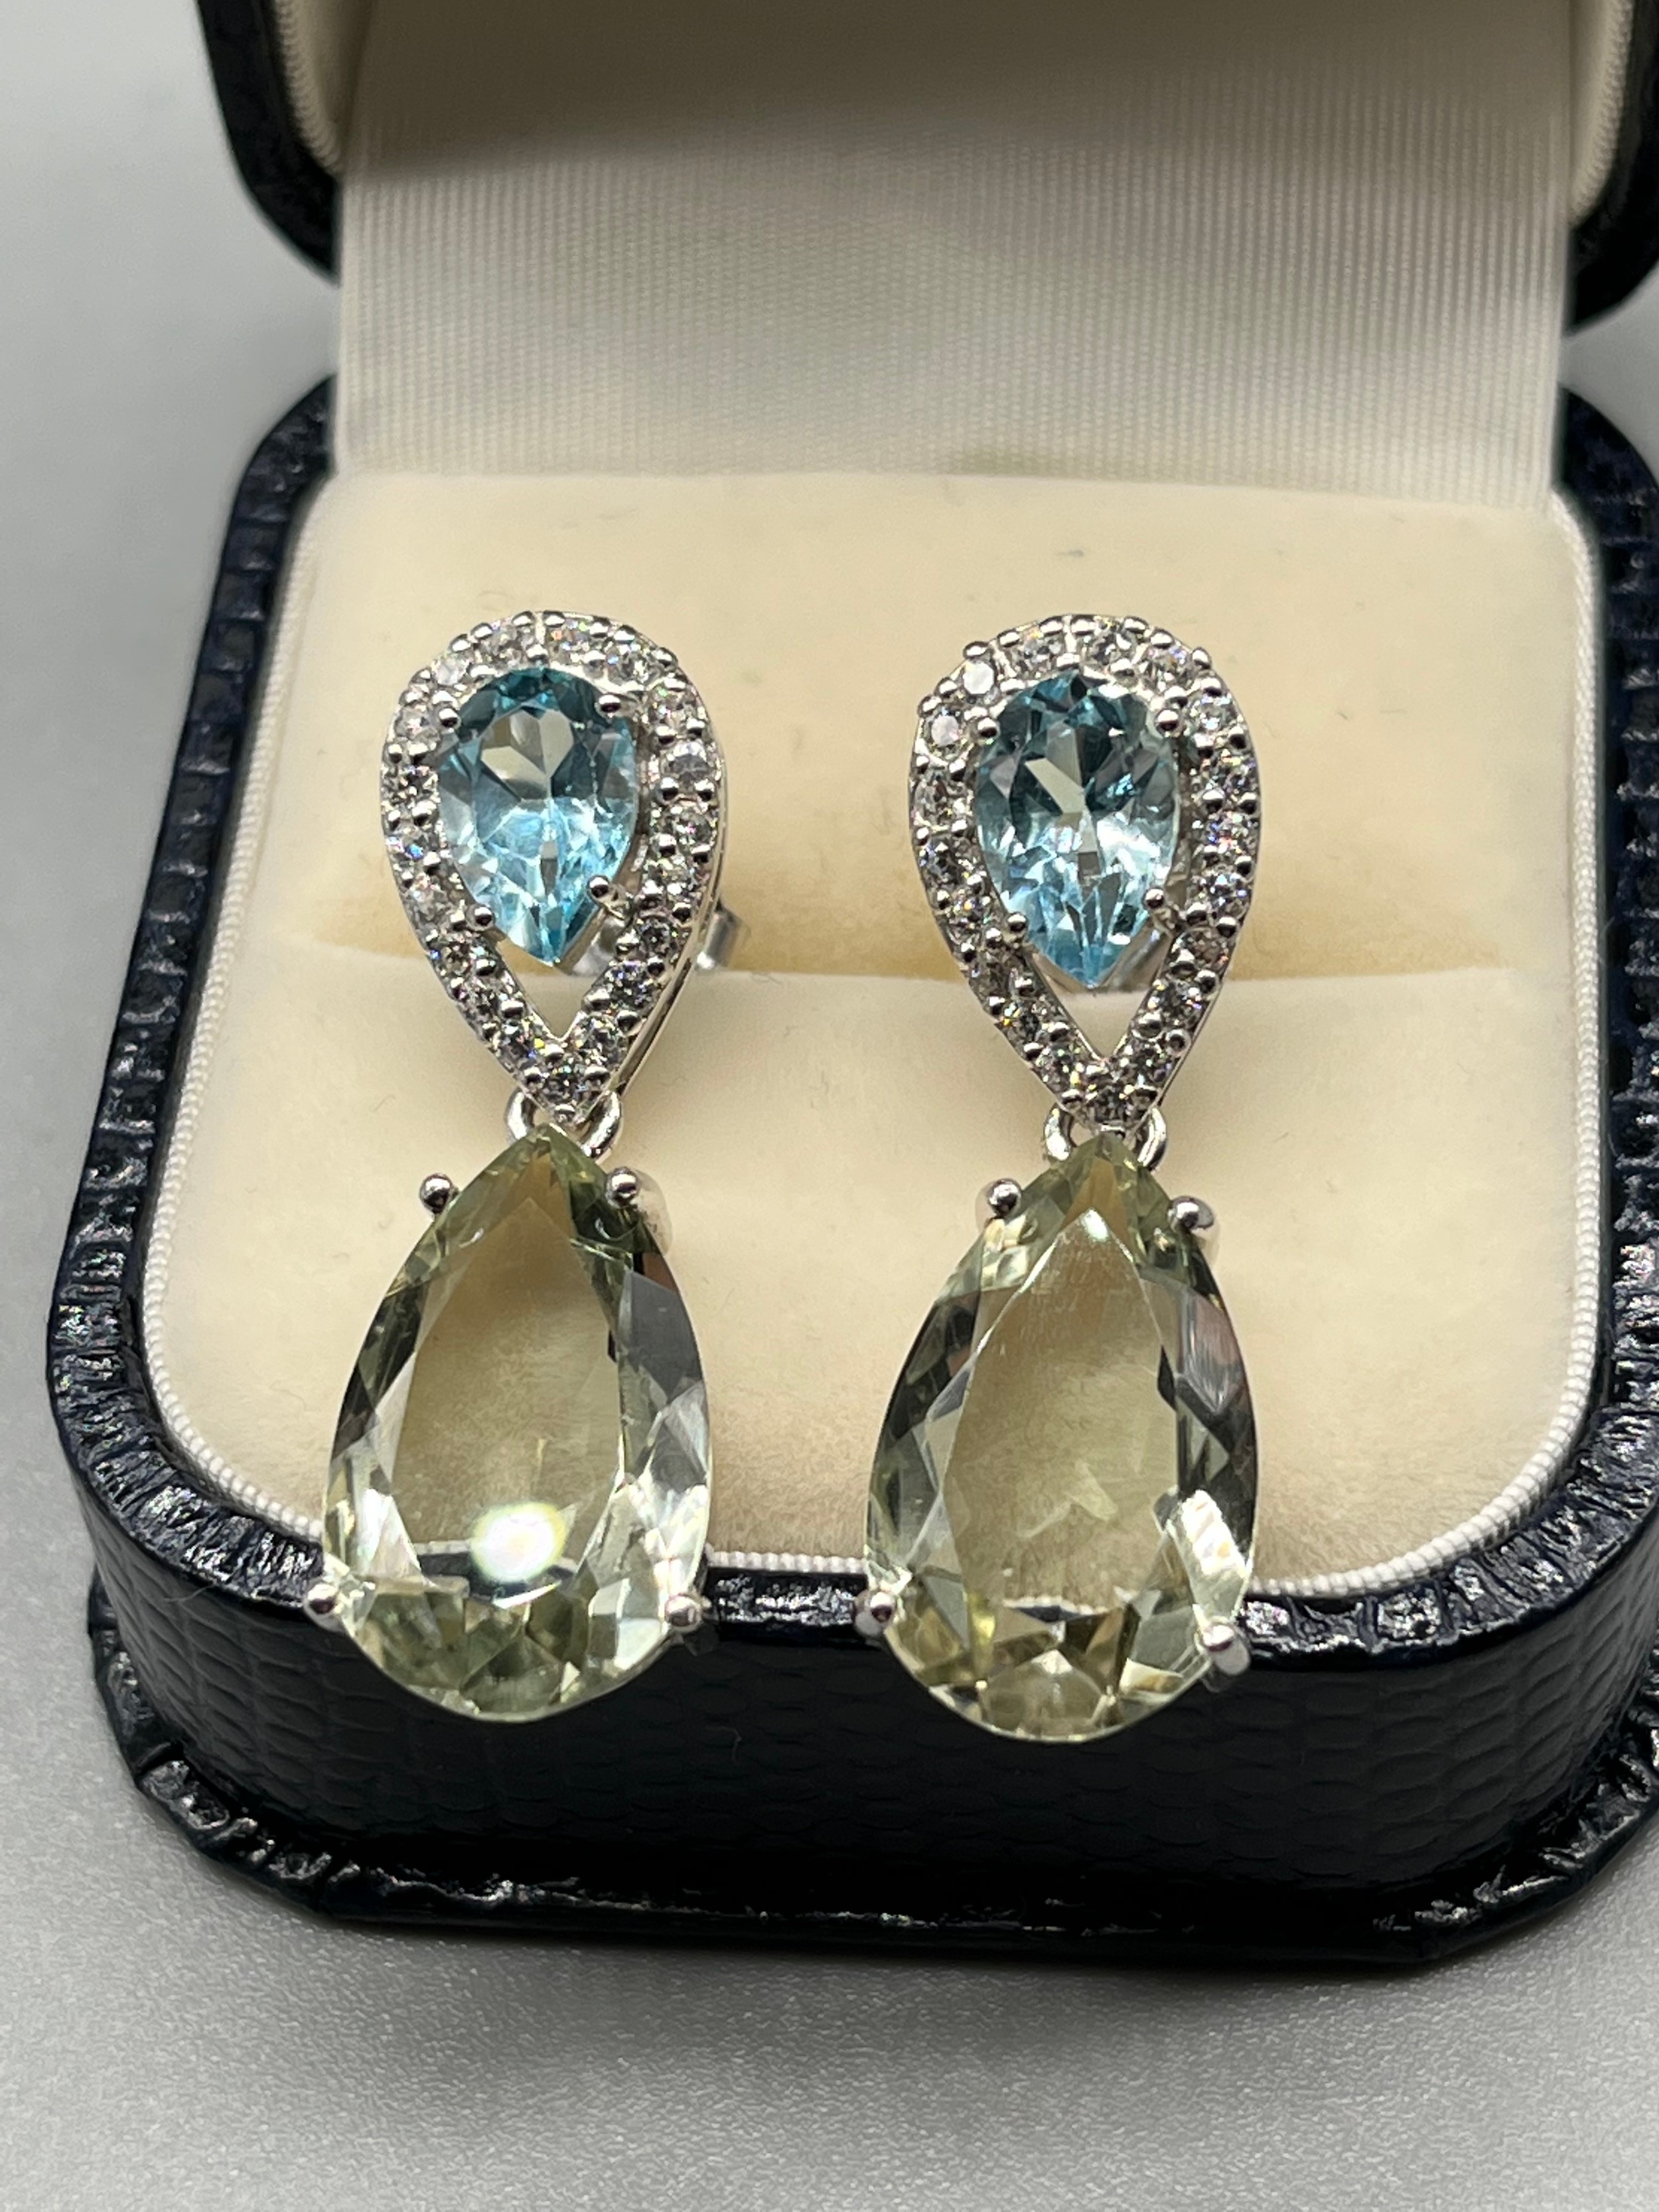 A Pair of silver, CZ and blue topaz drop earrings. - Image 2 of 2